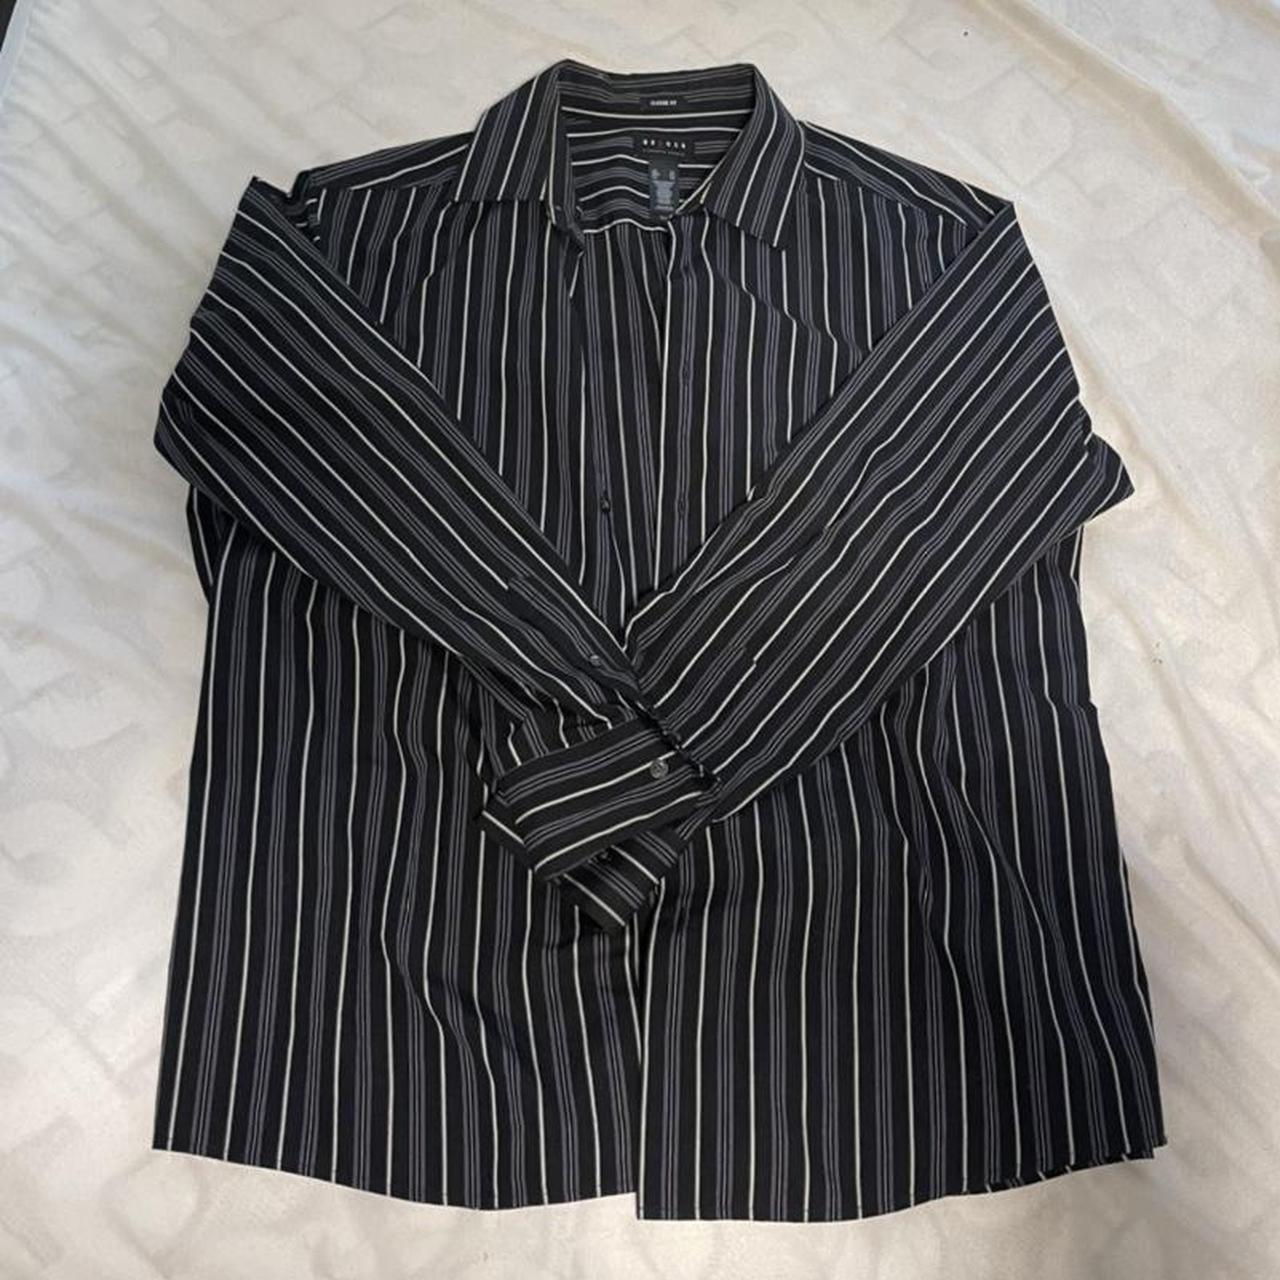 Black and purple pinstripe button up. Fits very... - Depop